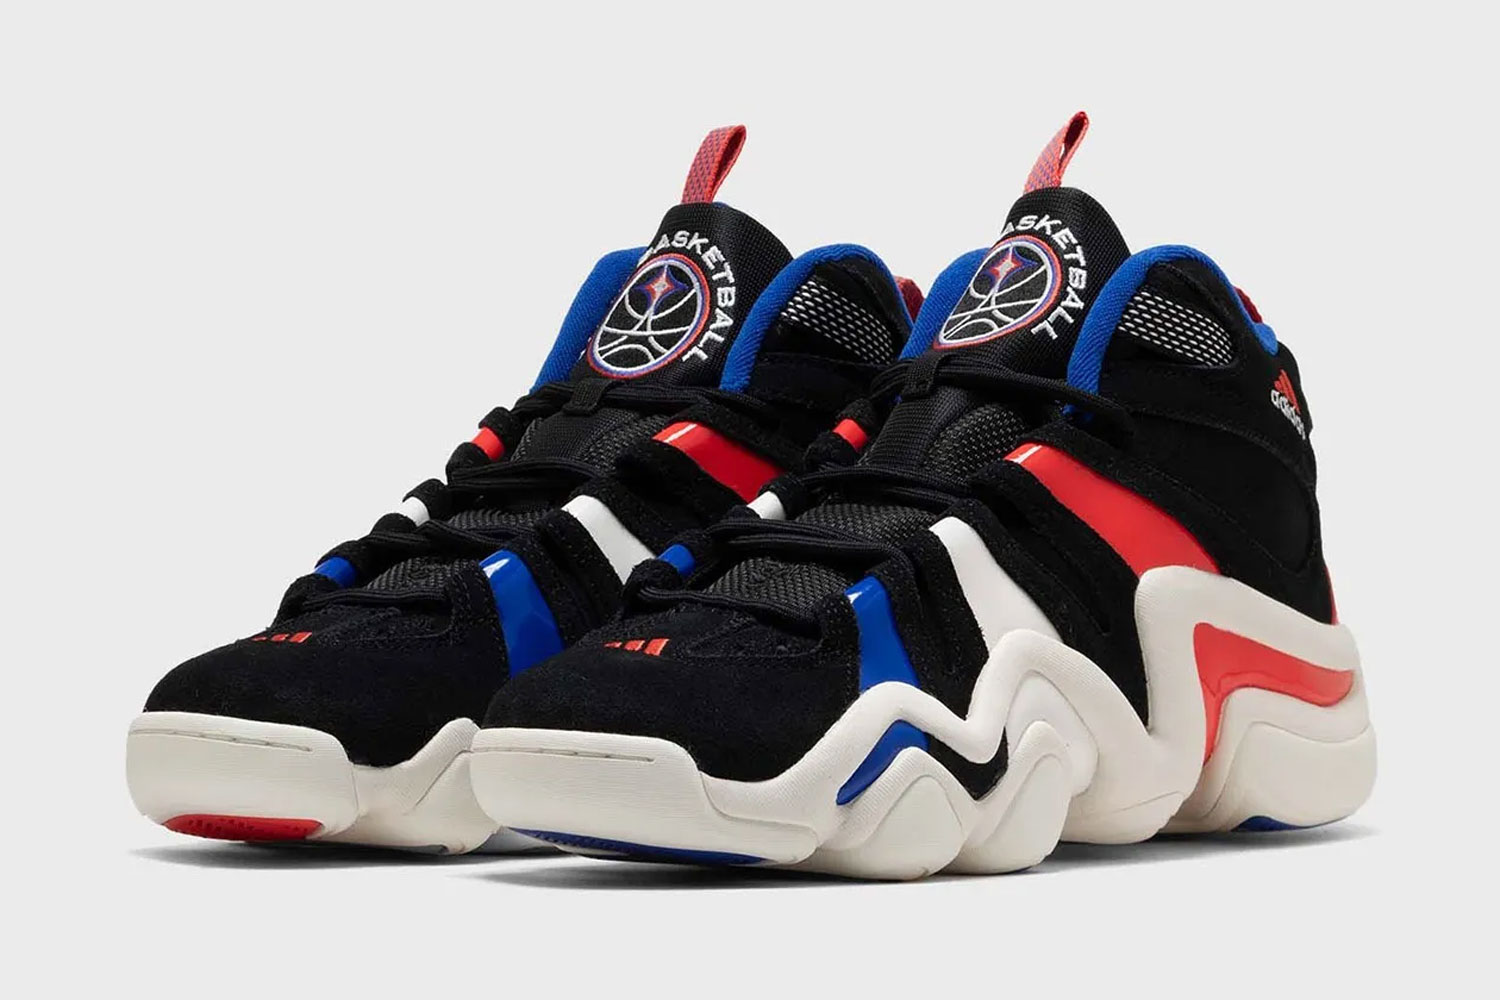 adidas Crazy 8 "French Basketball" IF4521